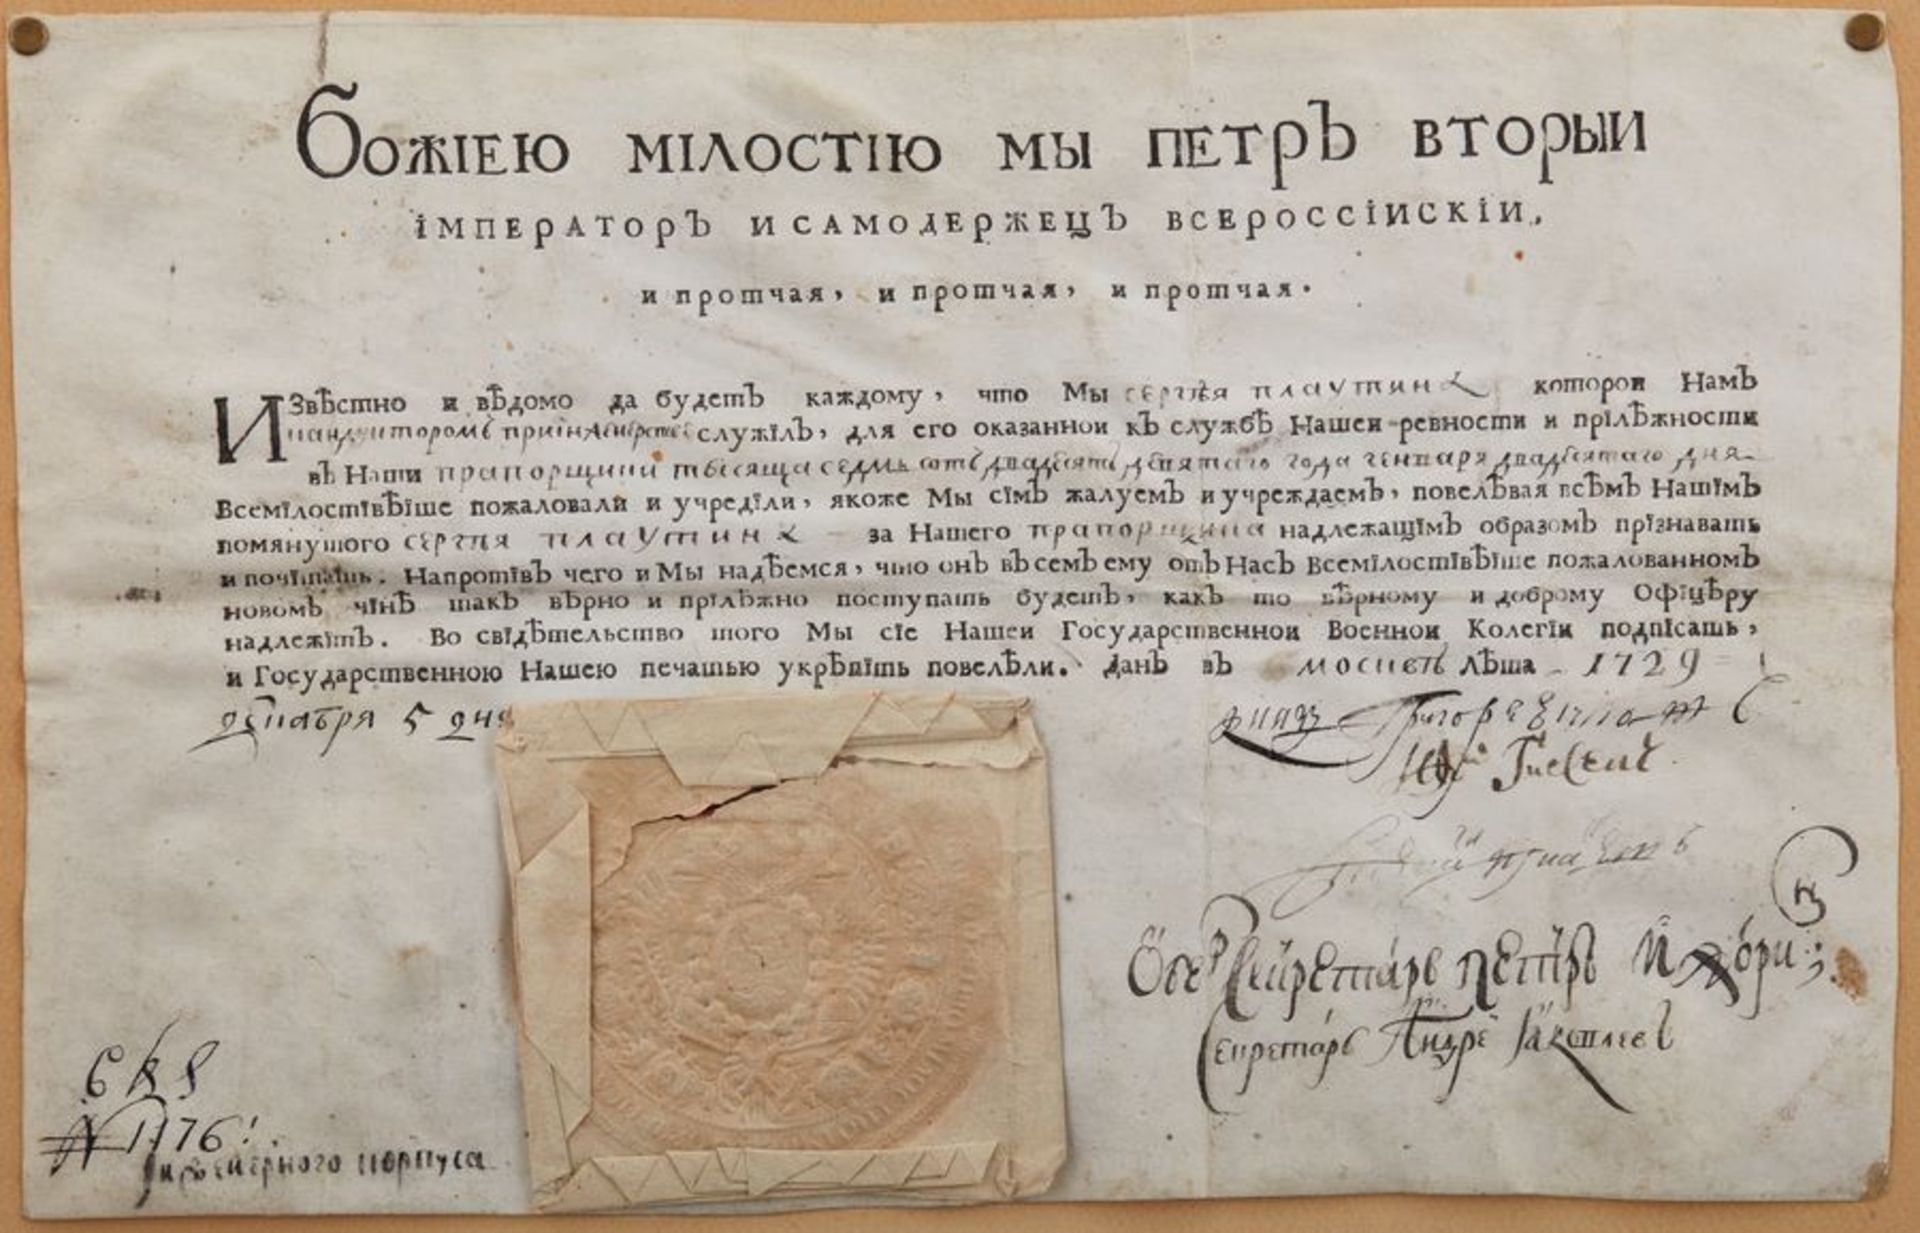 Peter II (1715-1730) - Charter of the reign of Peter II on the appointment of Sergei [...]